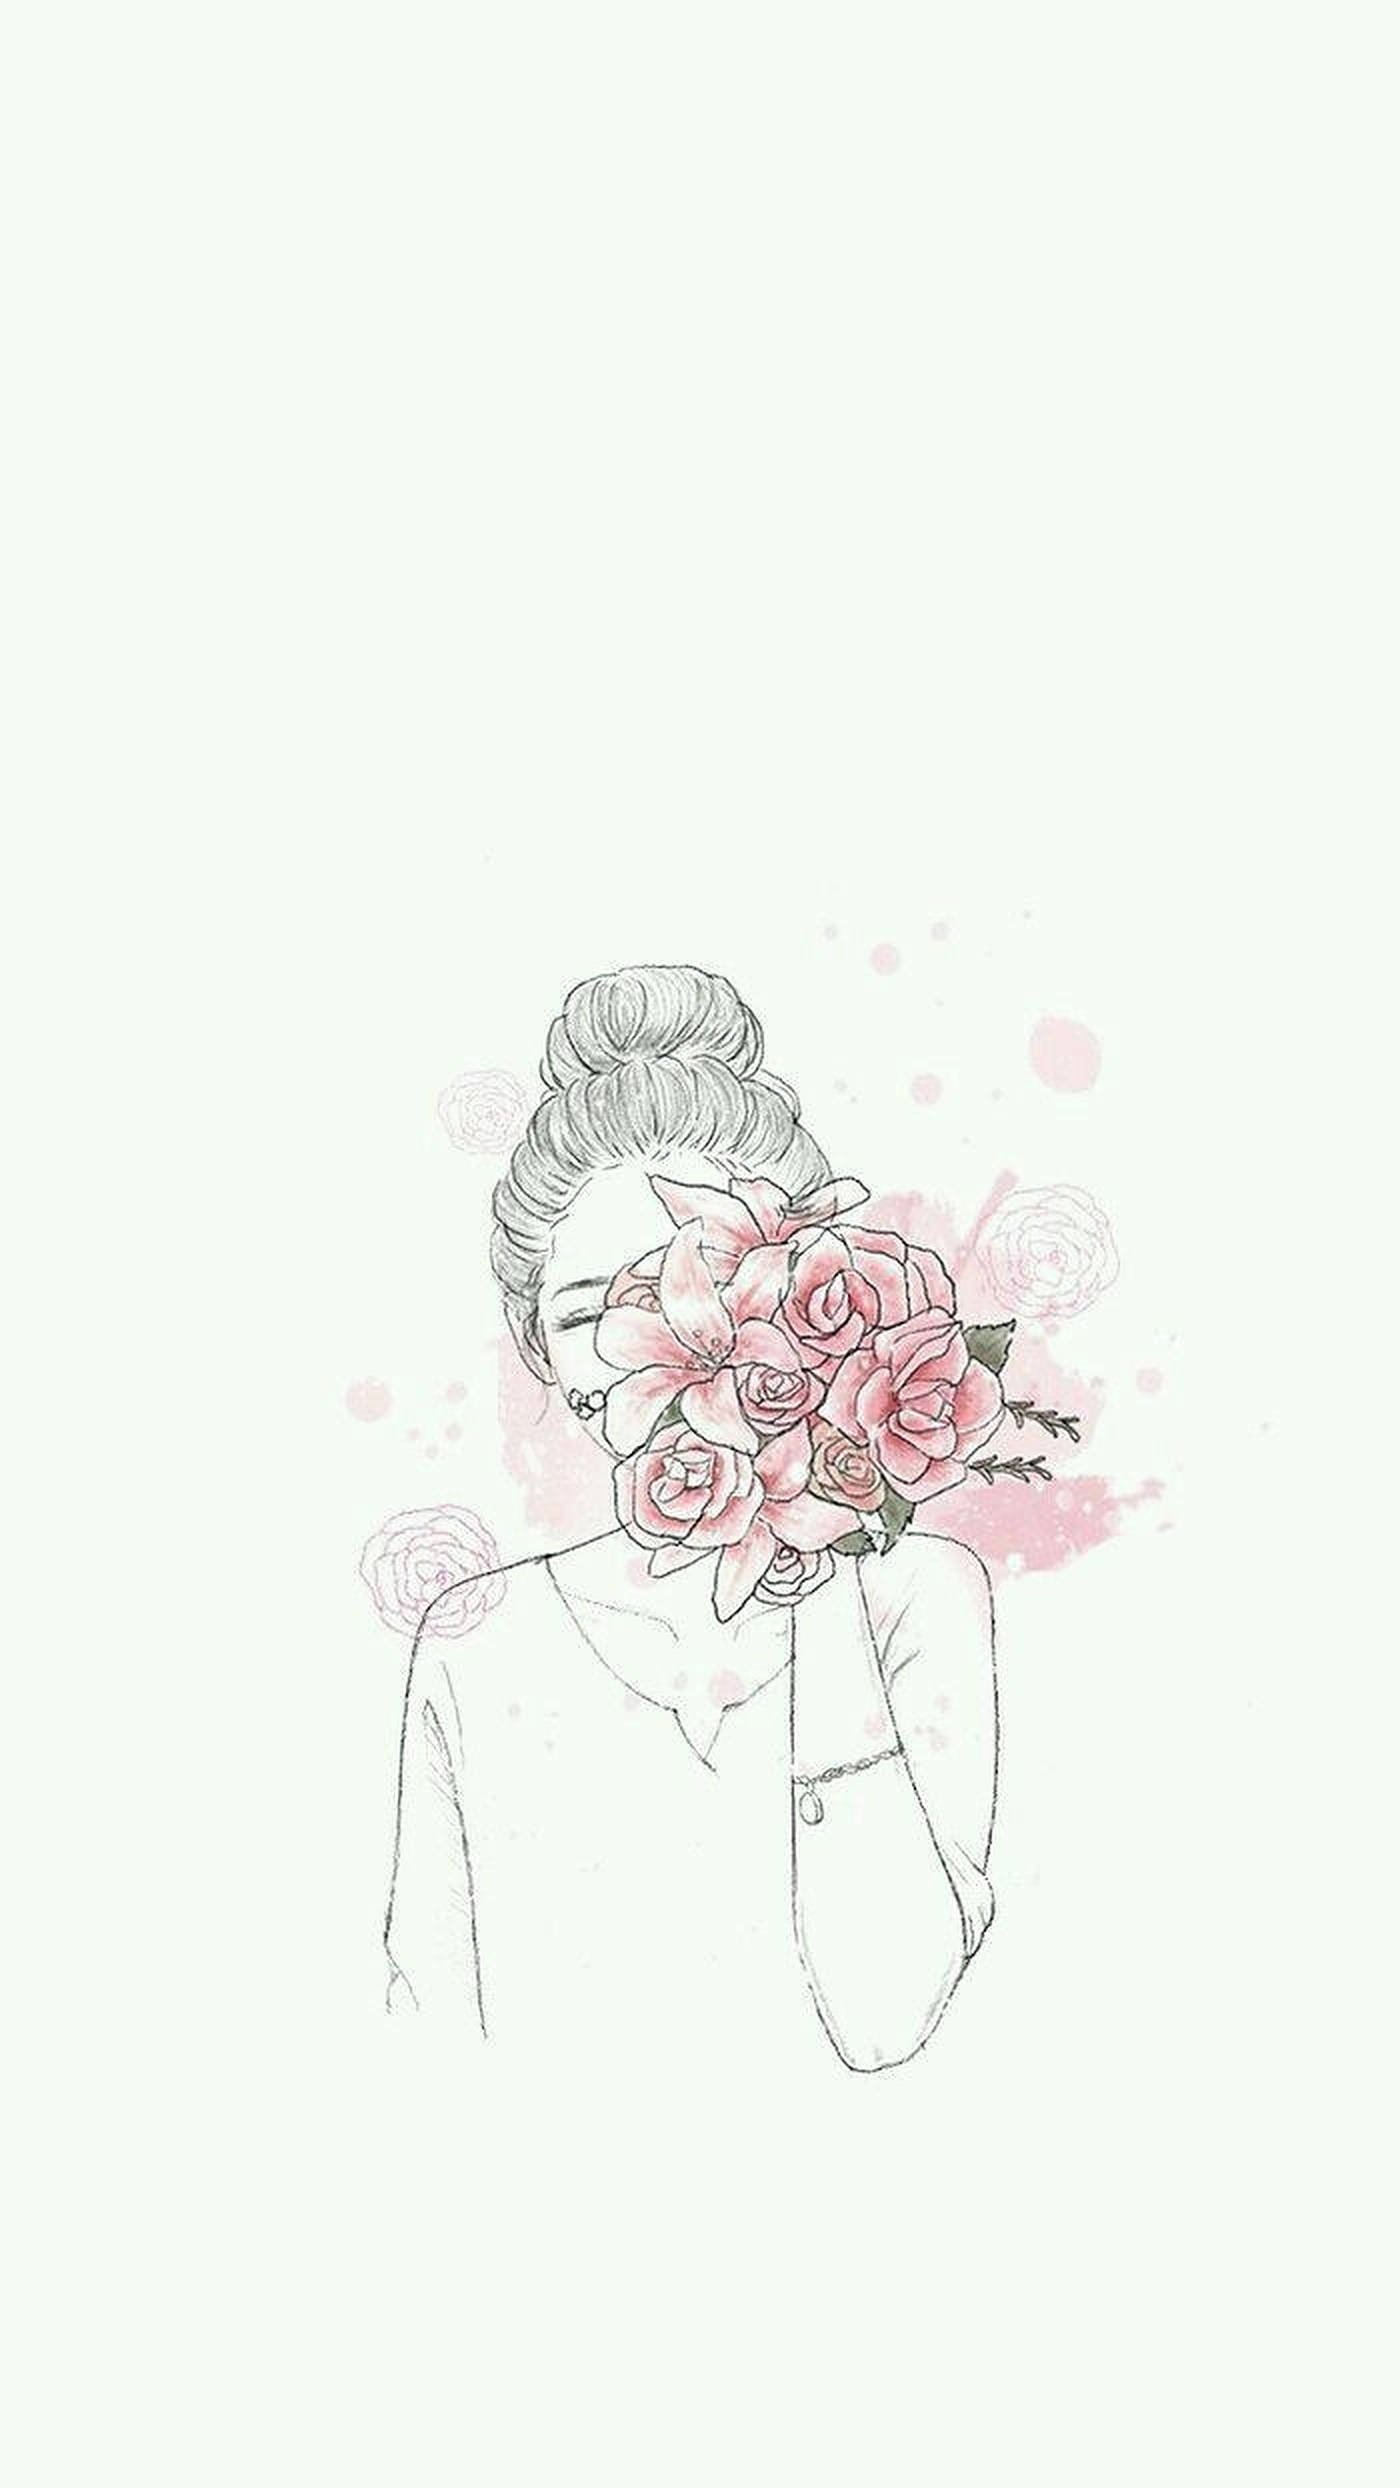 Download Aesthetic Girl With Pink Flowers Wallpaper